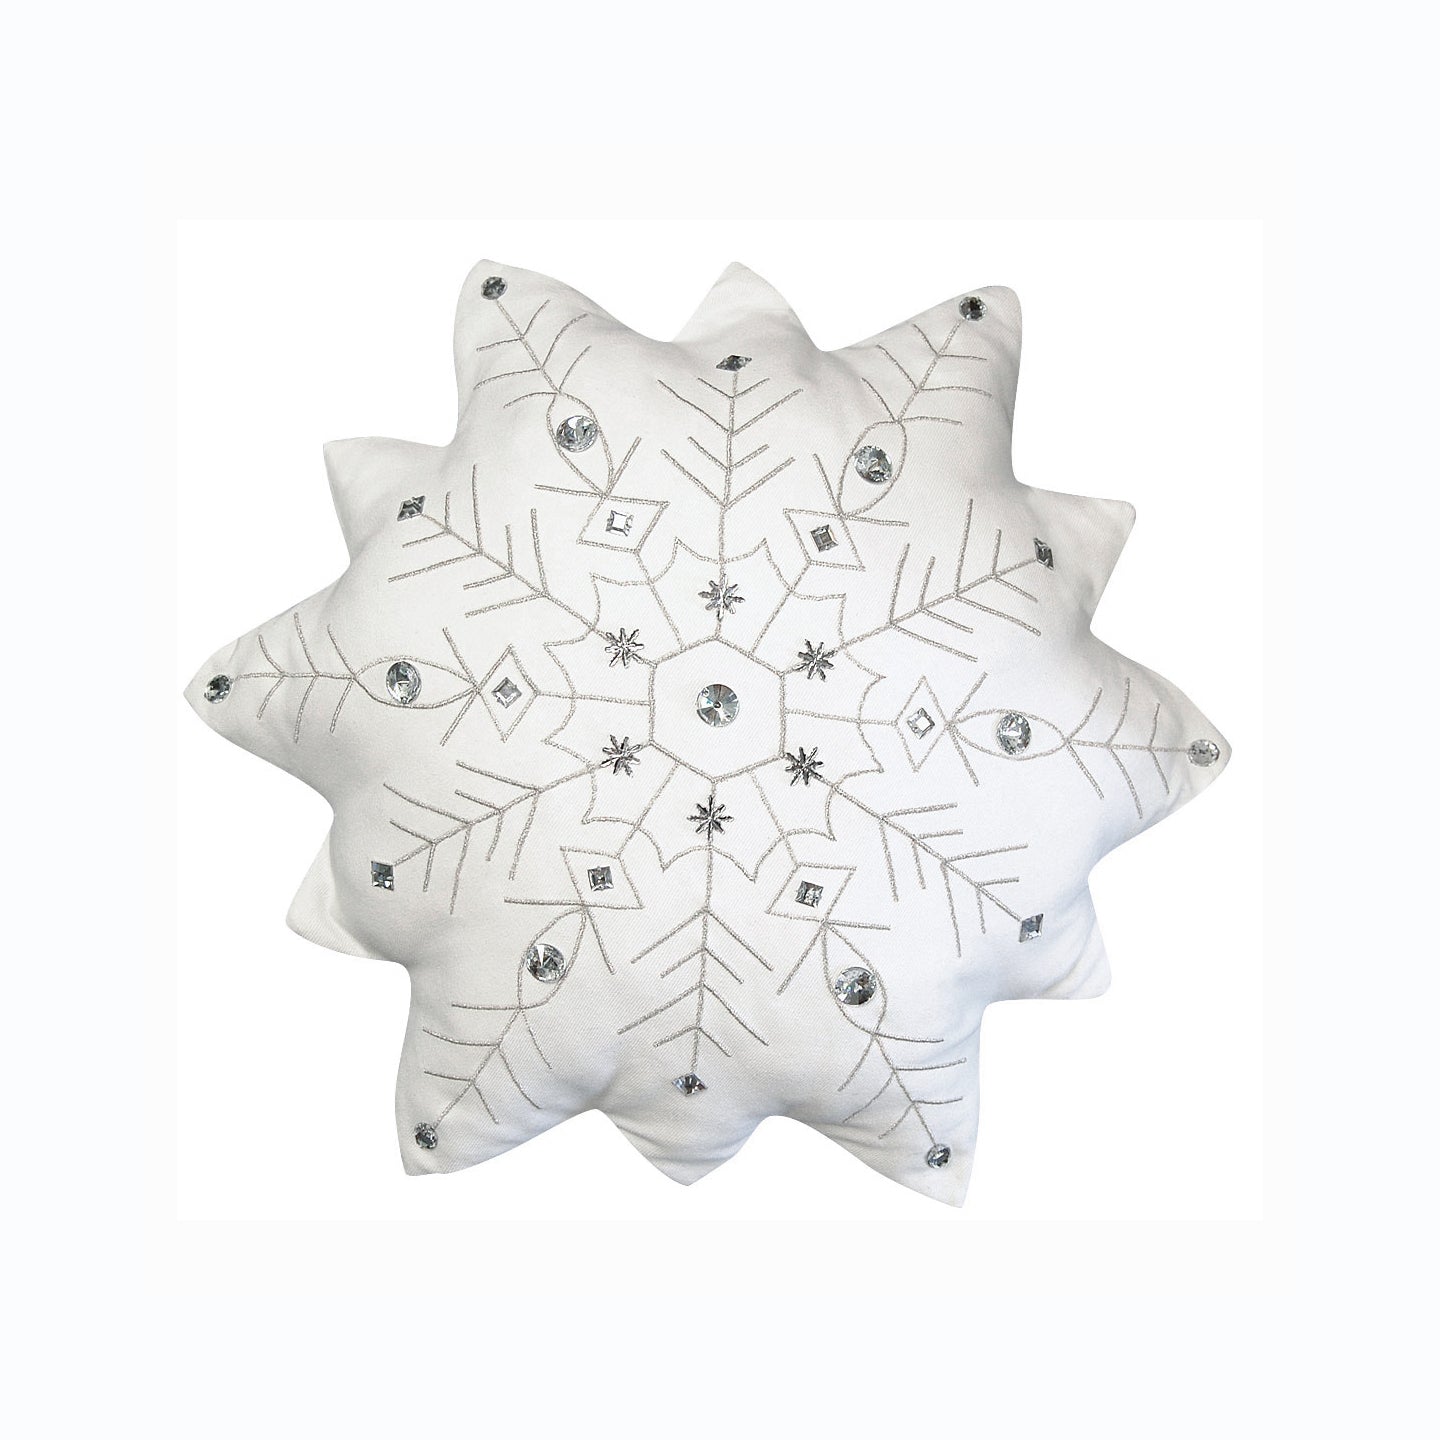 Twelve pointed snowflake pillow featuring silver beading and embroidery.